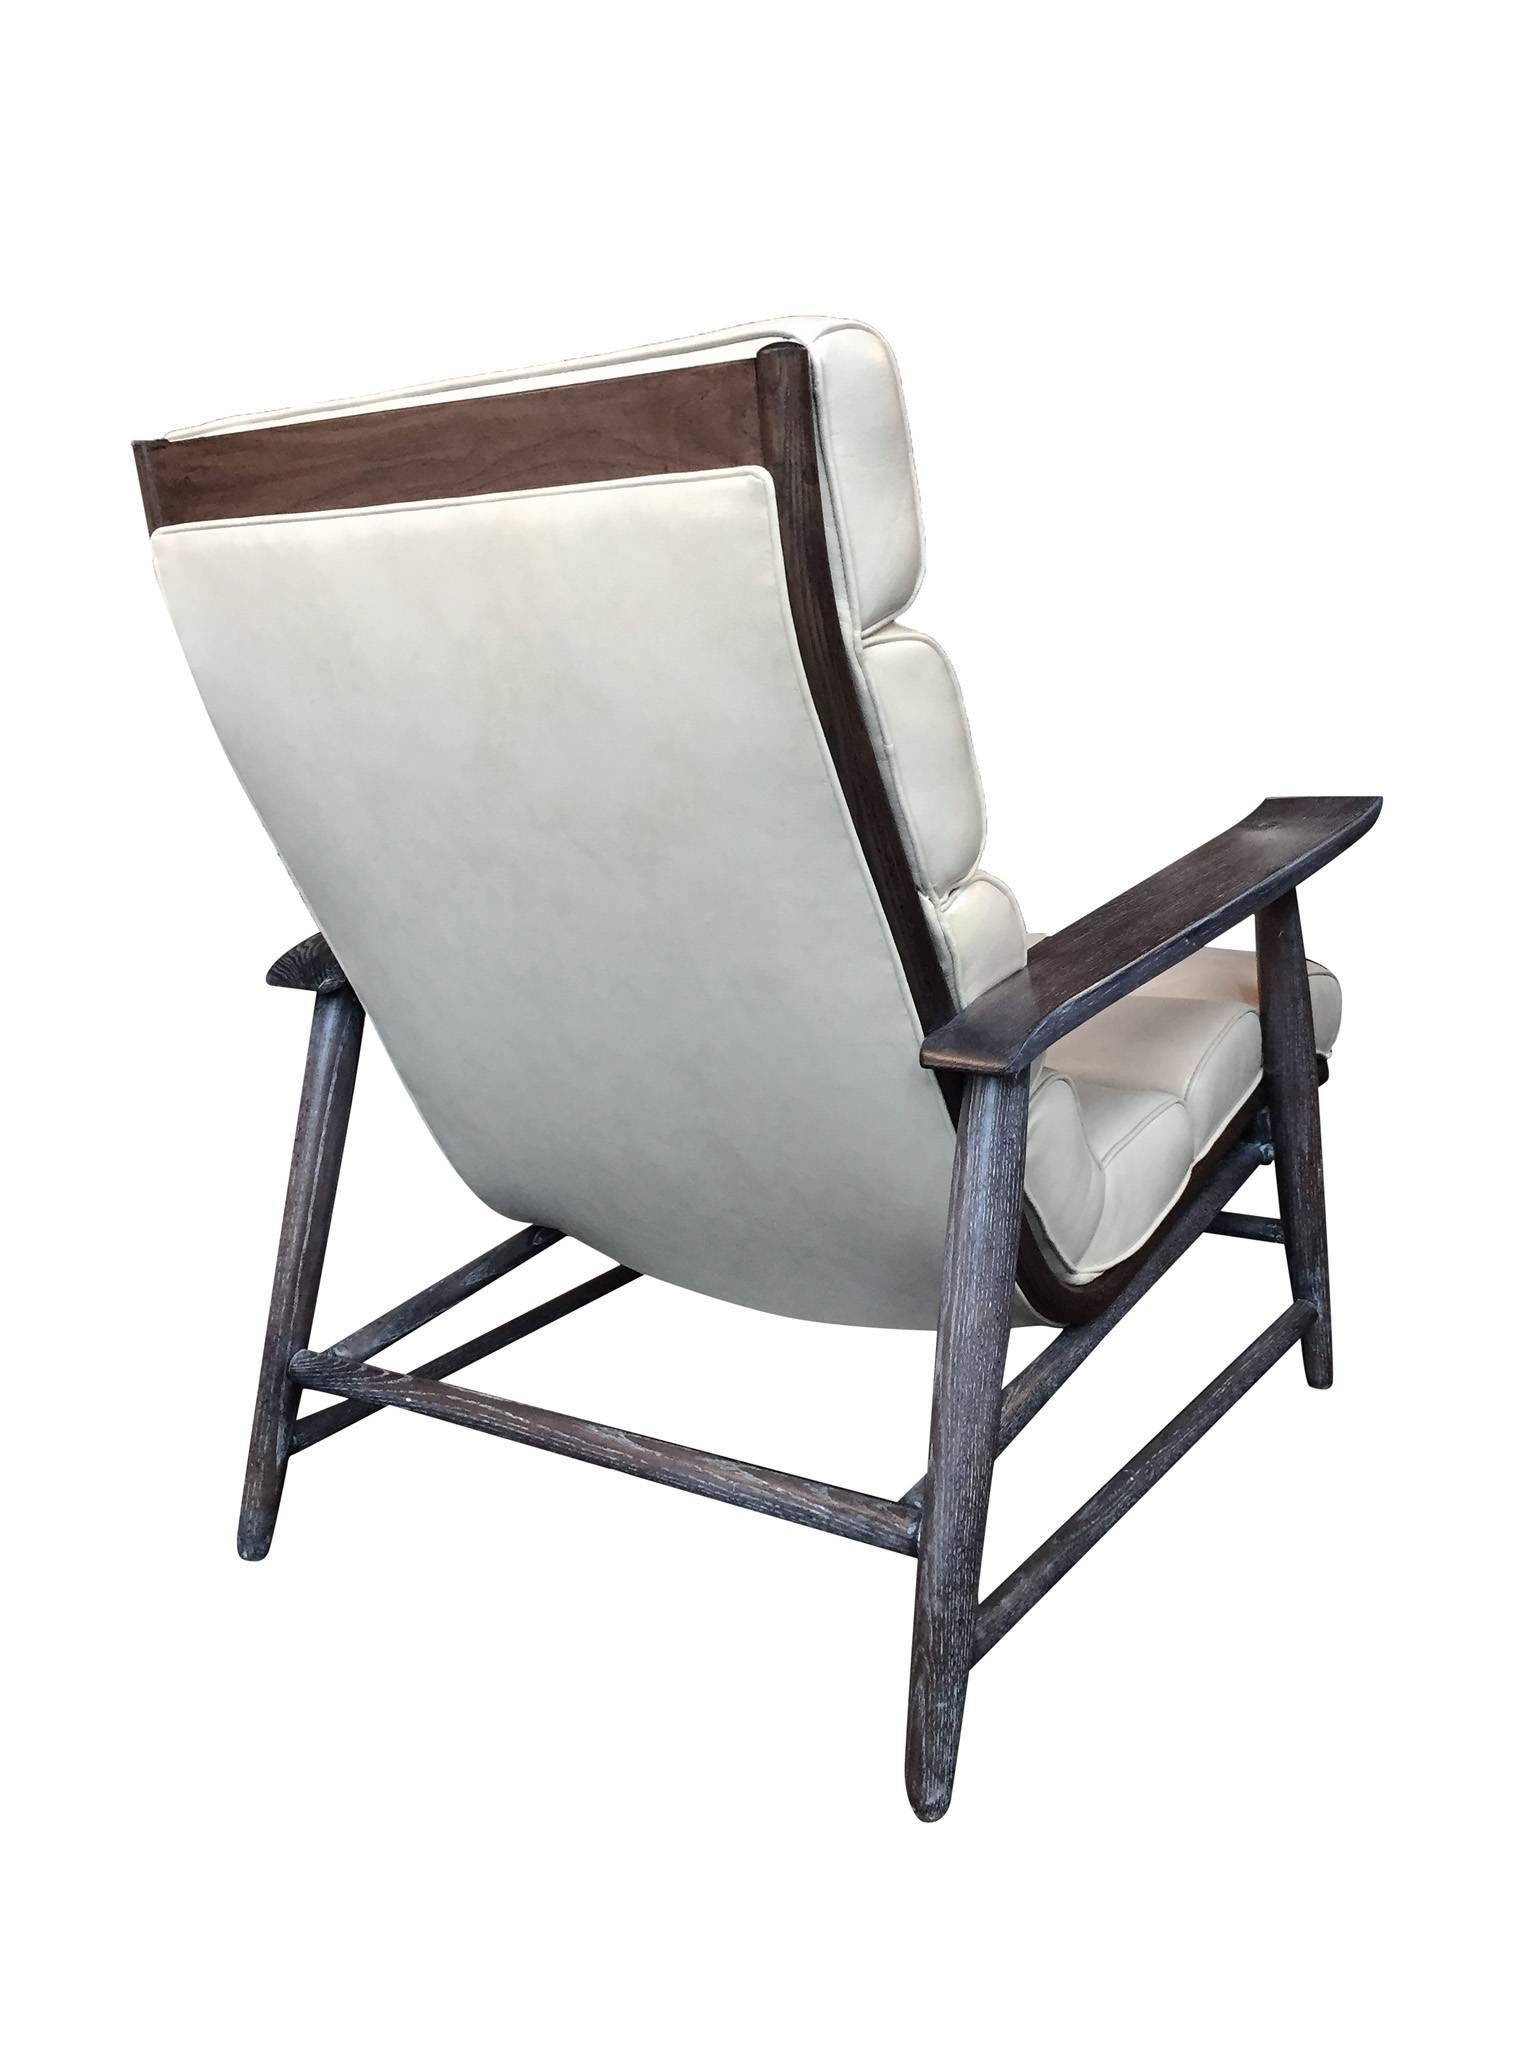 American 1960s Cerused Oak and Ecru Leather Armchair in the Manner of Jay Spectre